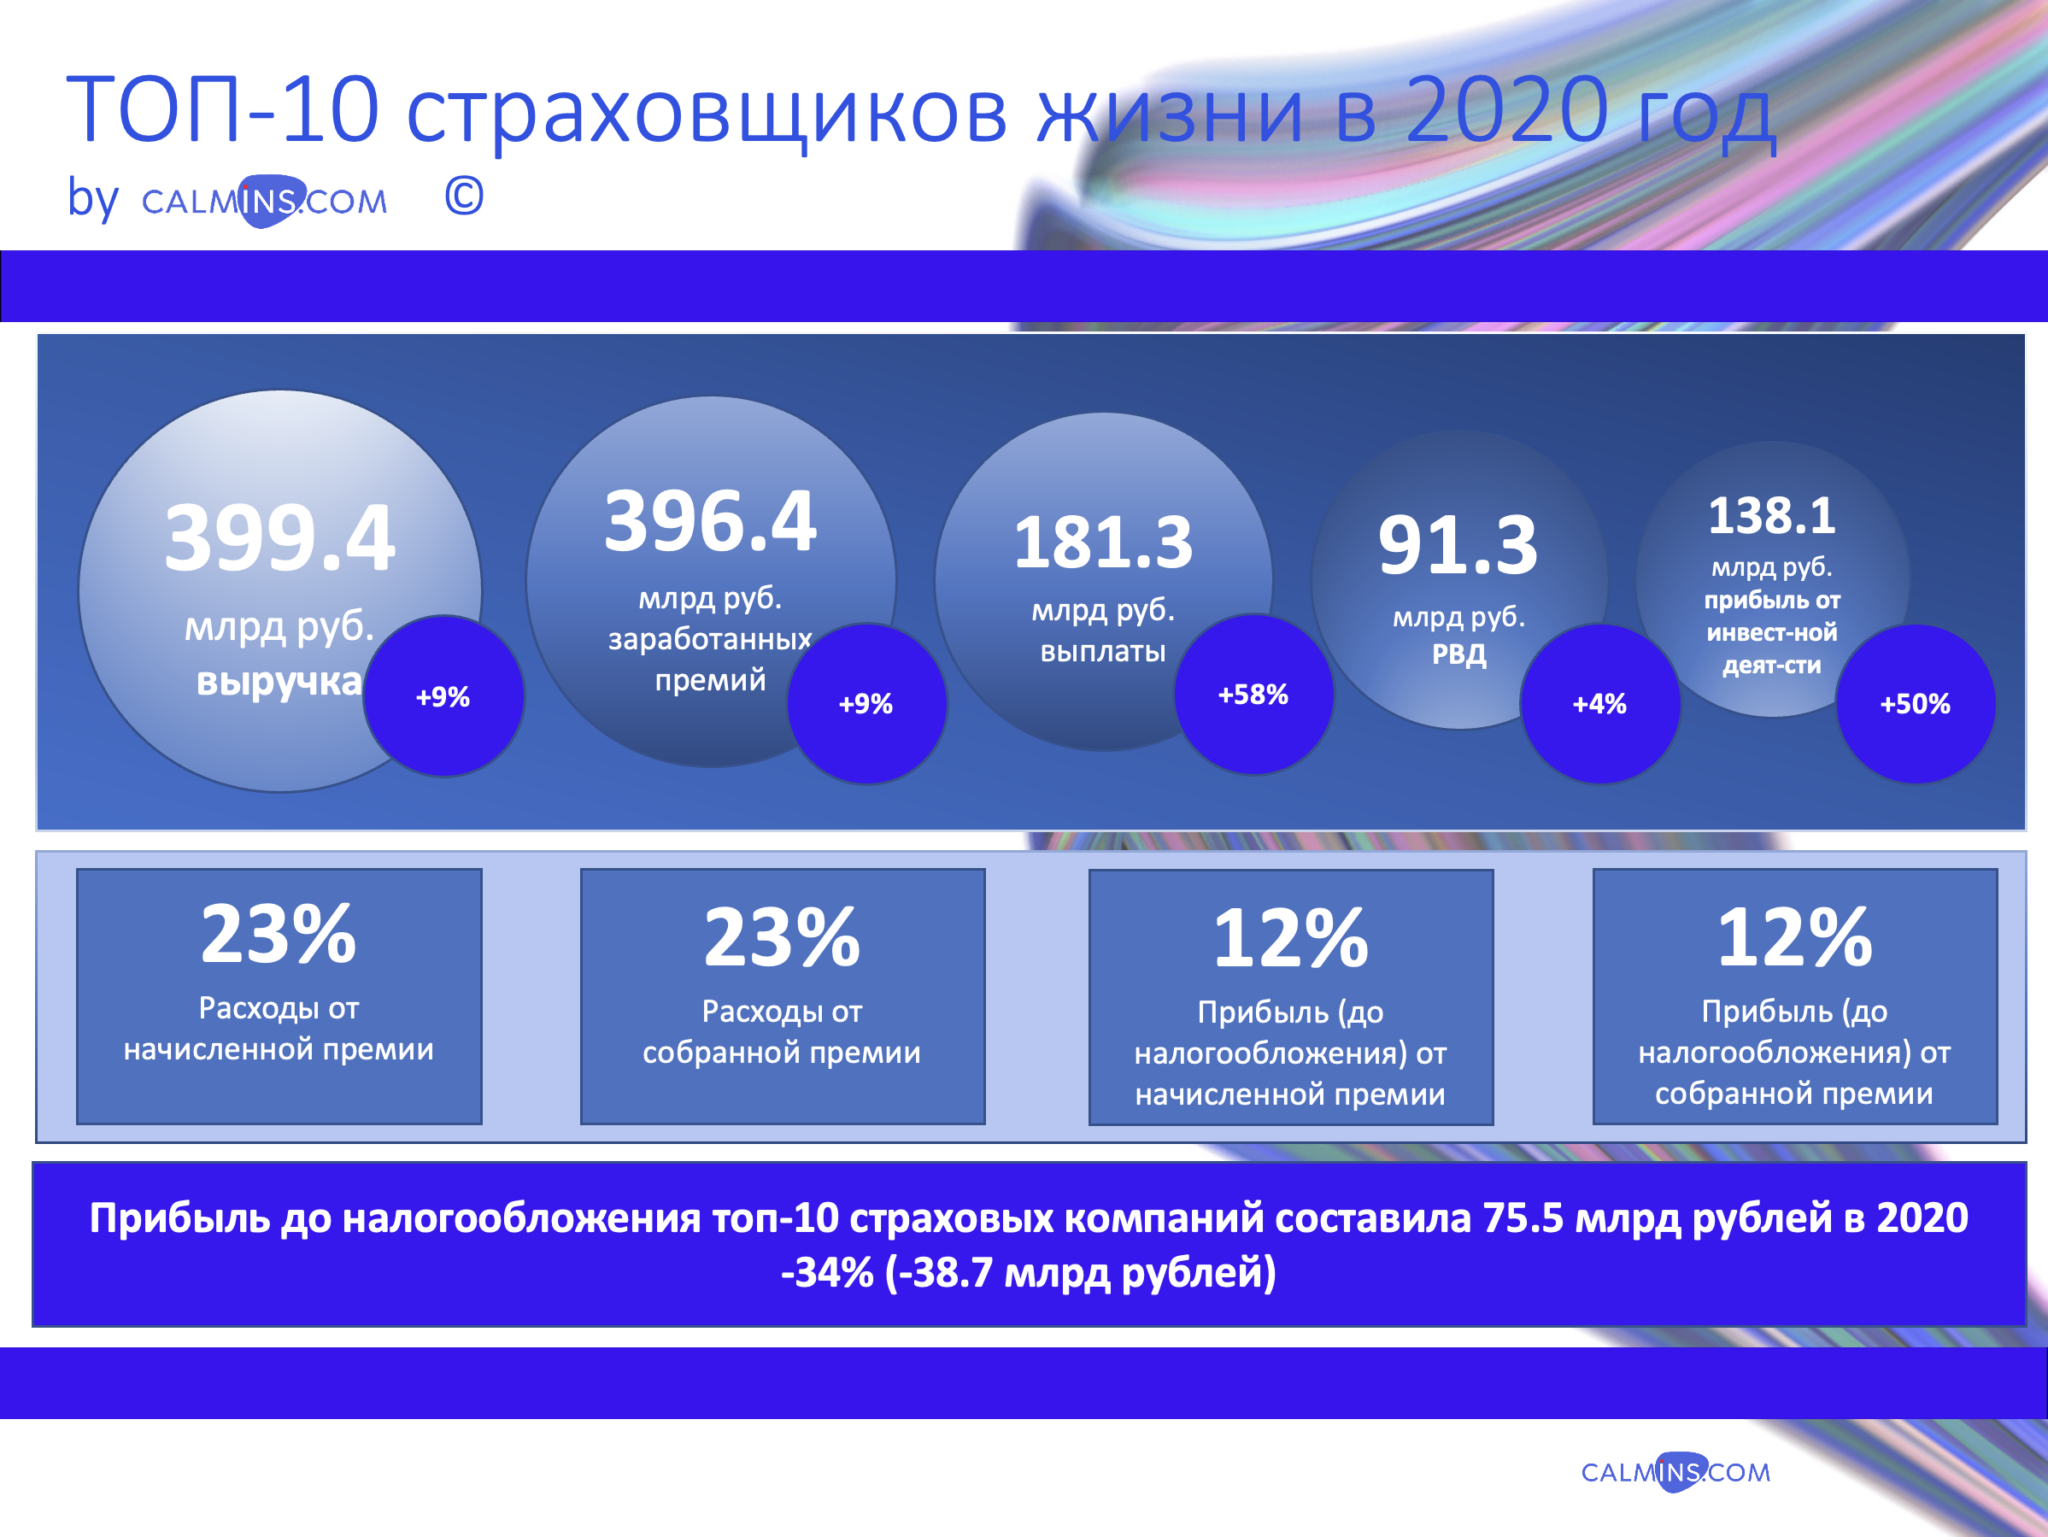 10 major changes of the insurance market in Russia 2021 - Expert Opinion